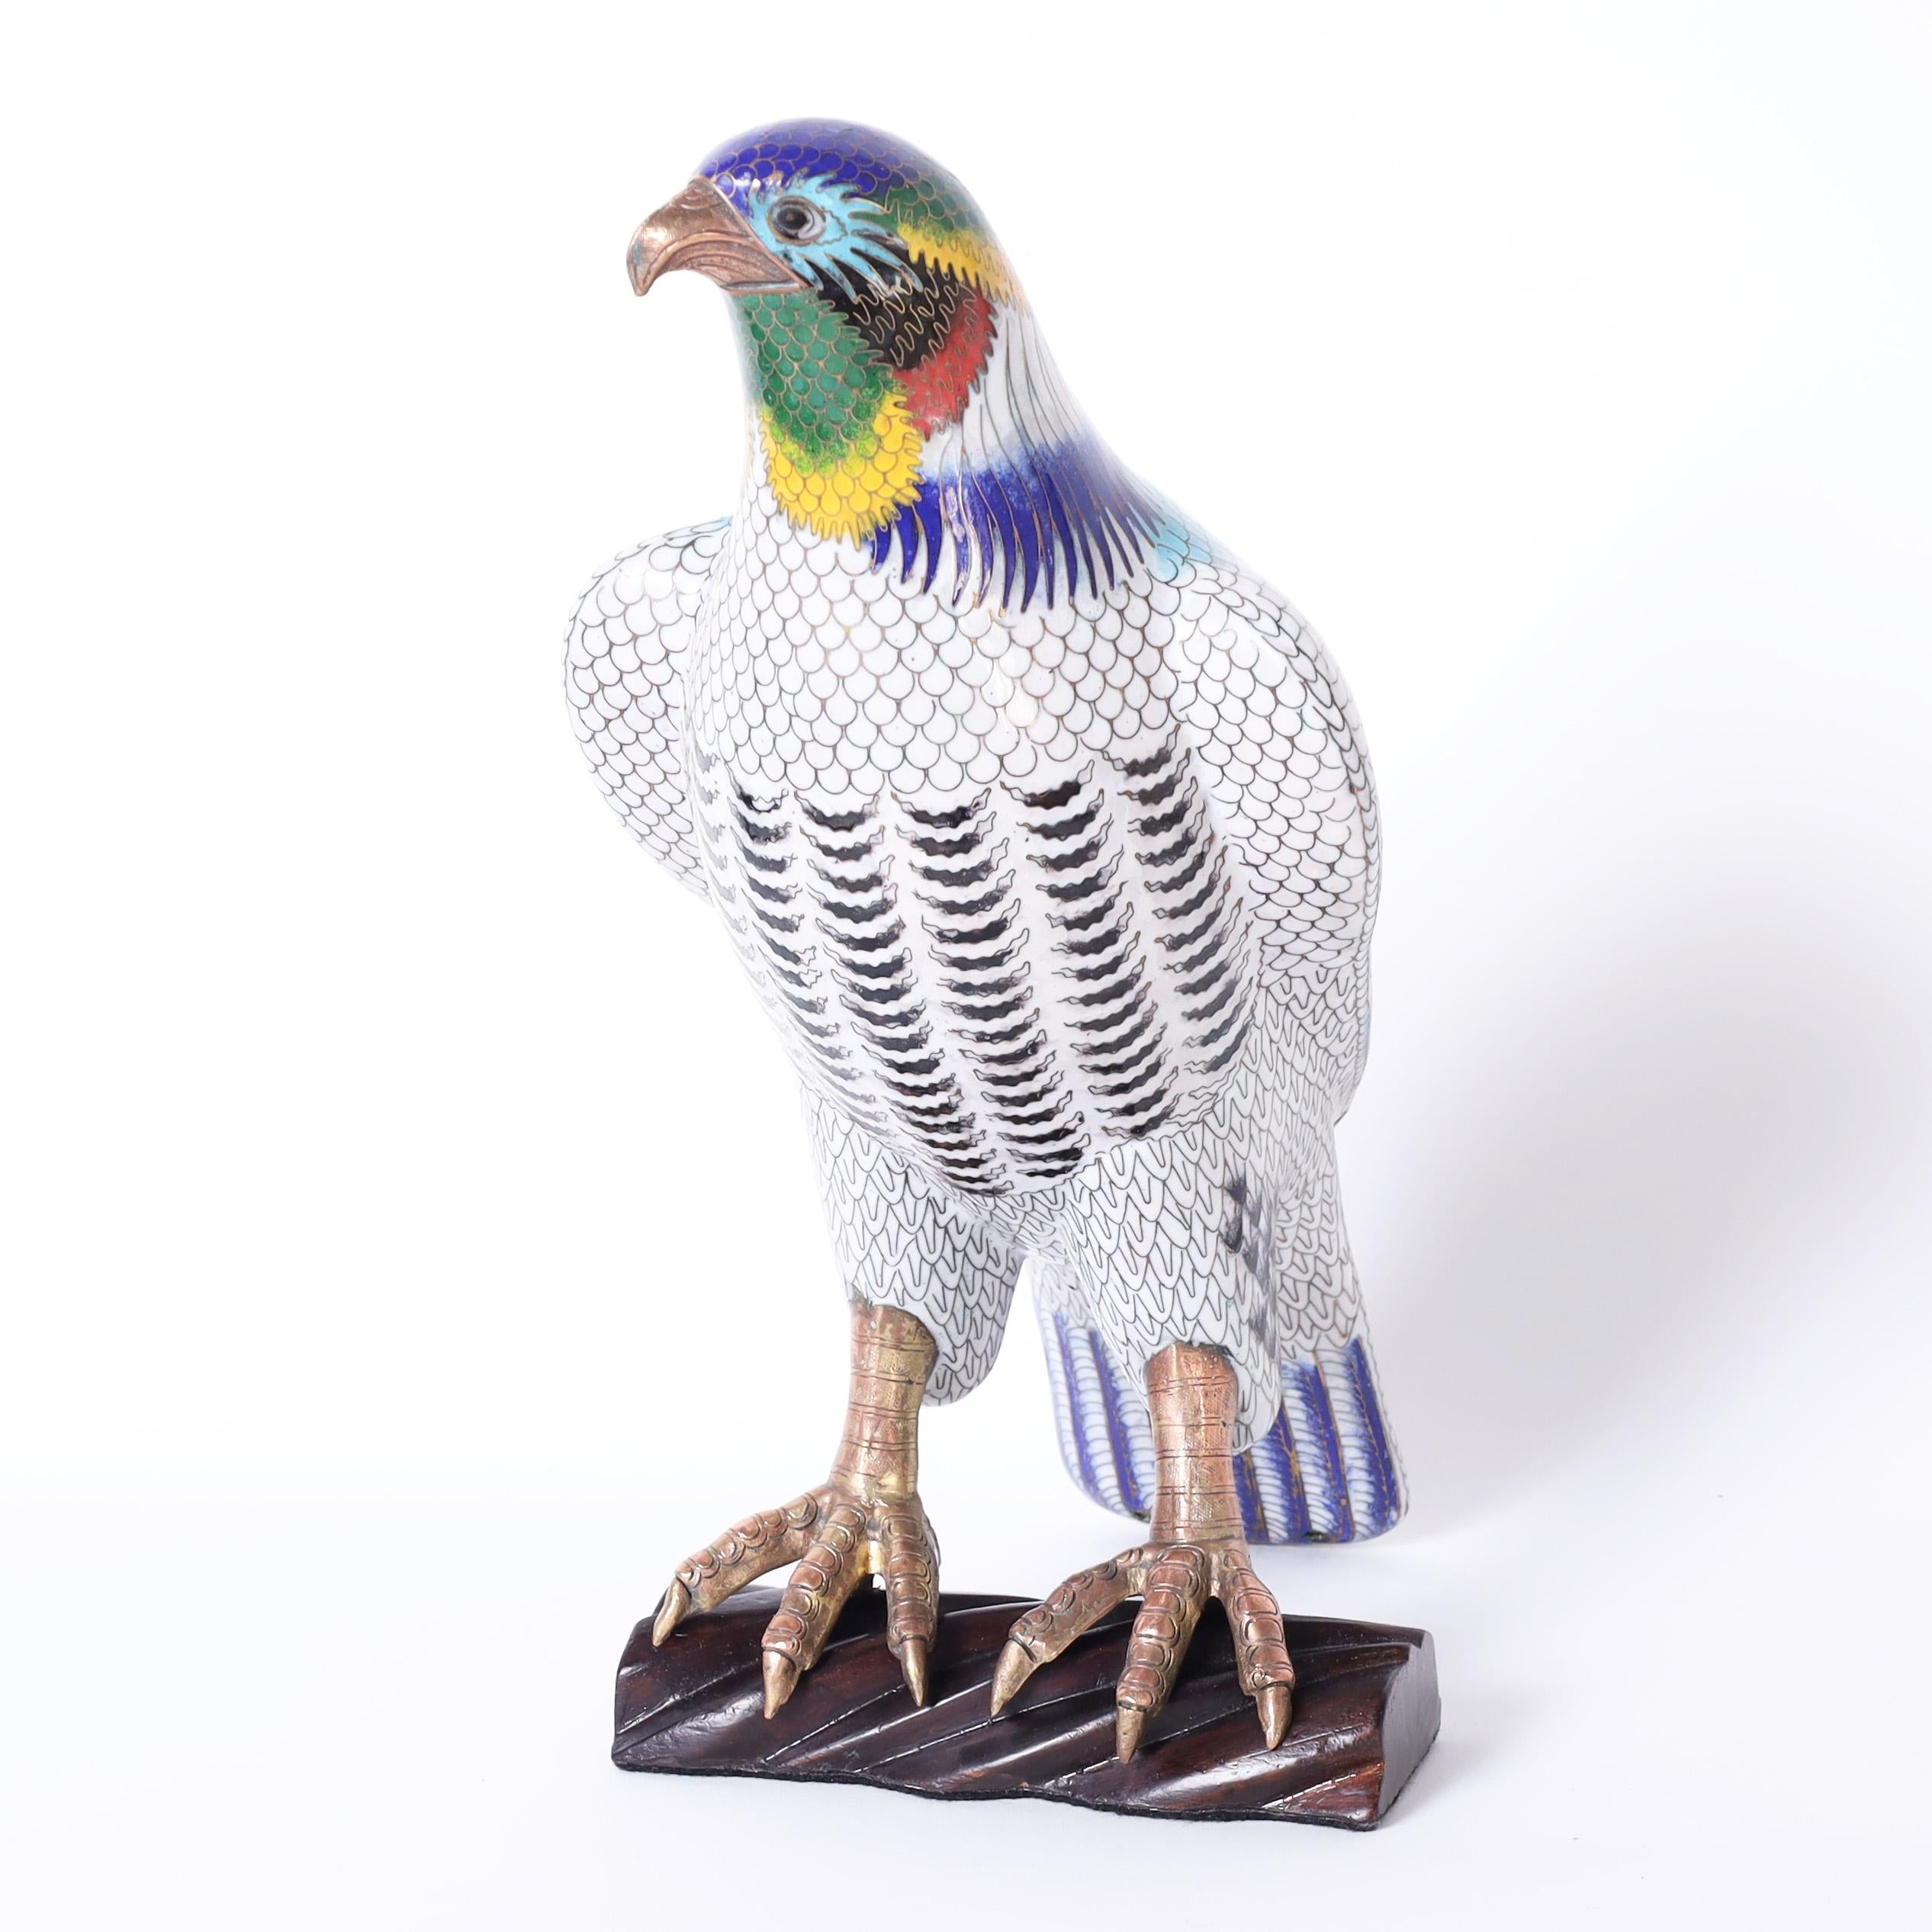 Standout near life size Chinese cloisonne or enamel on copper bird of prey ambitiously decorated in a feather motif and presented on a wood base. 